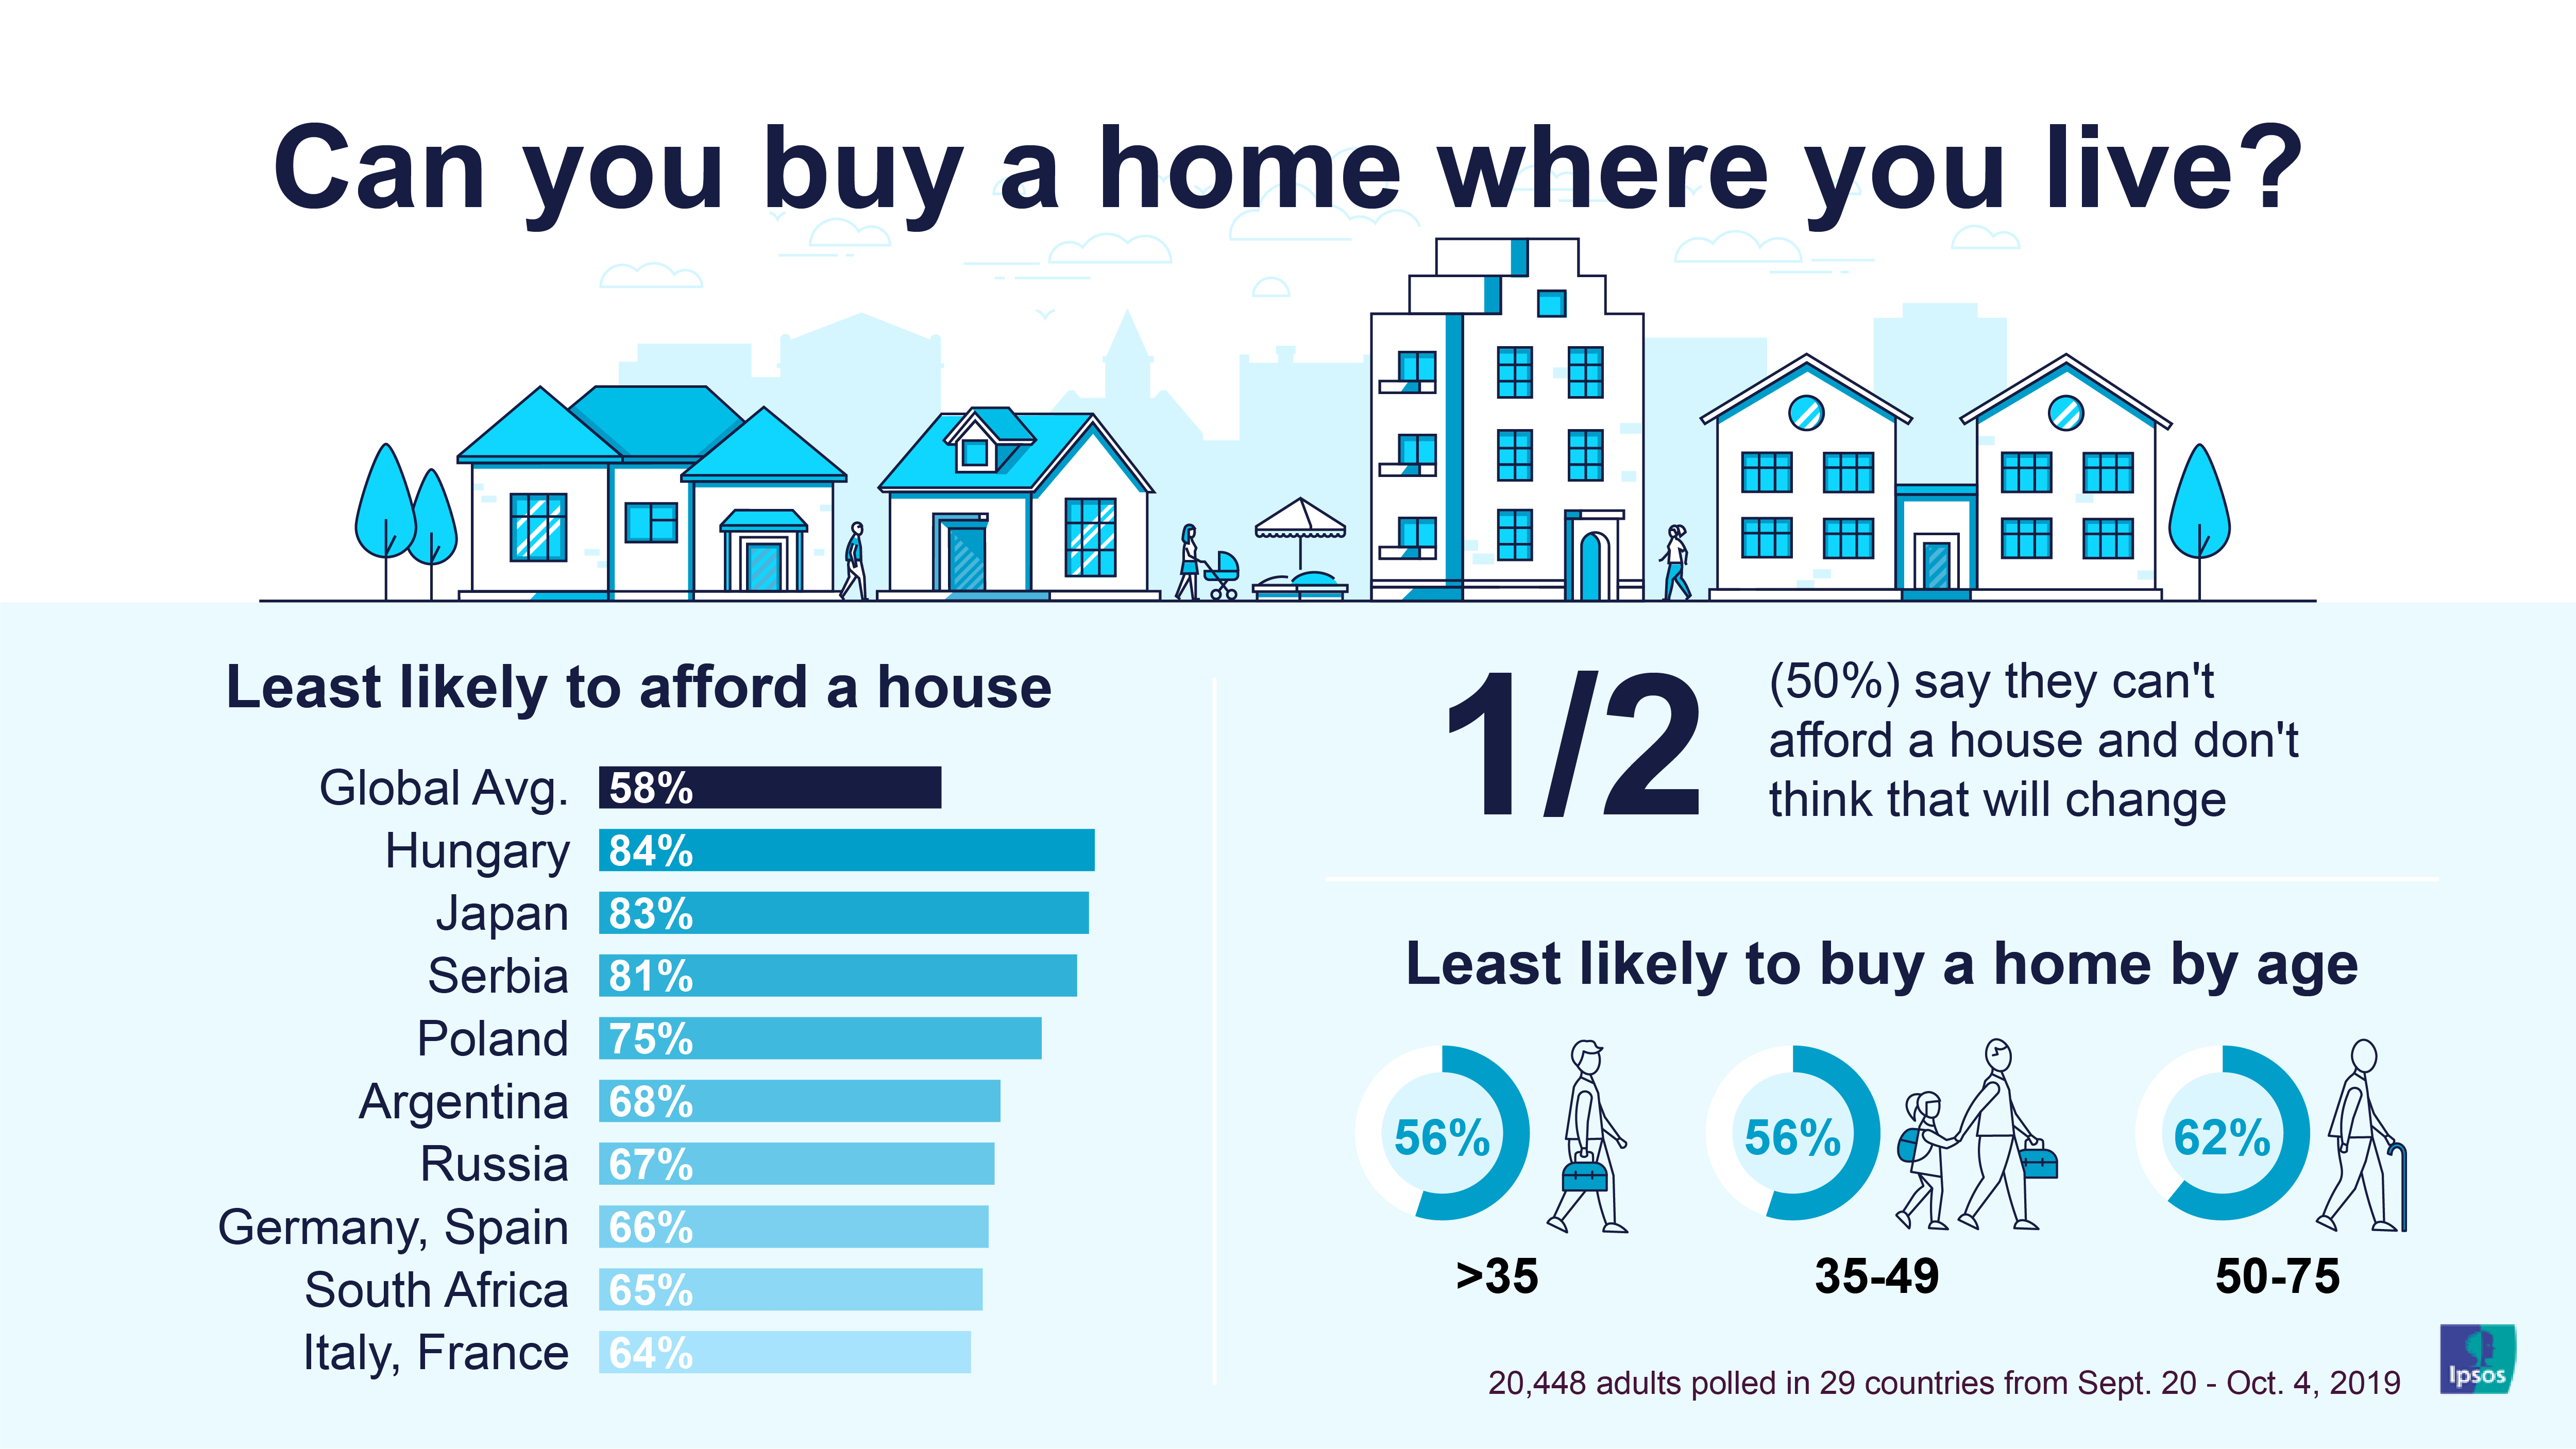 Can you afford to buy a house? Most say 